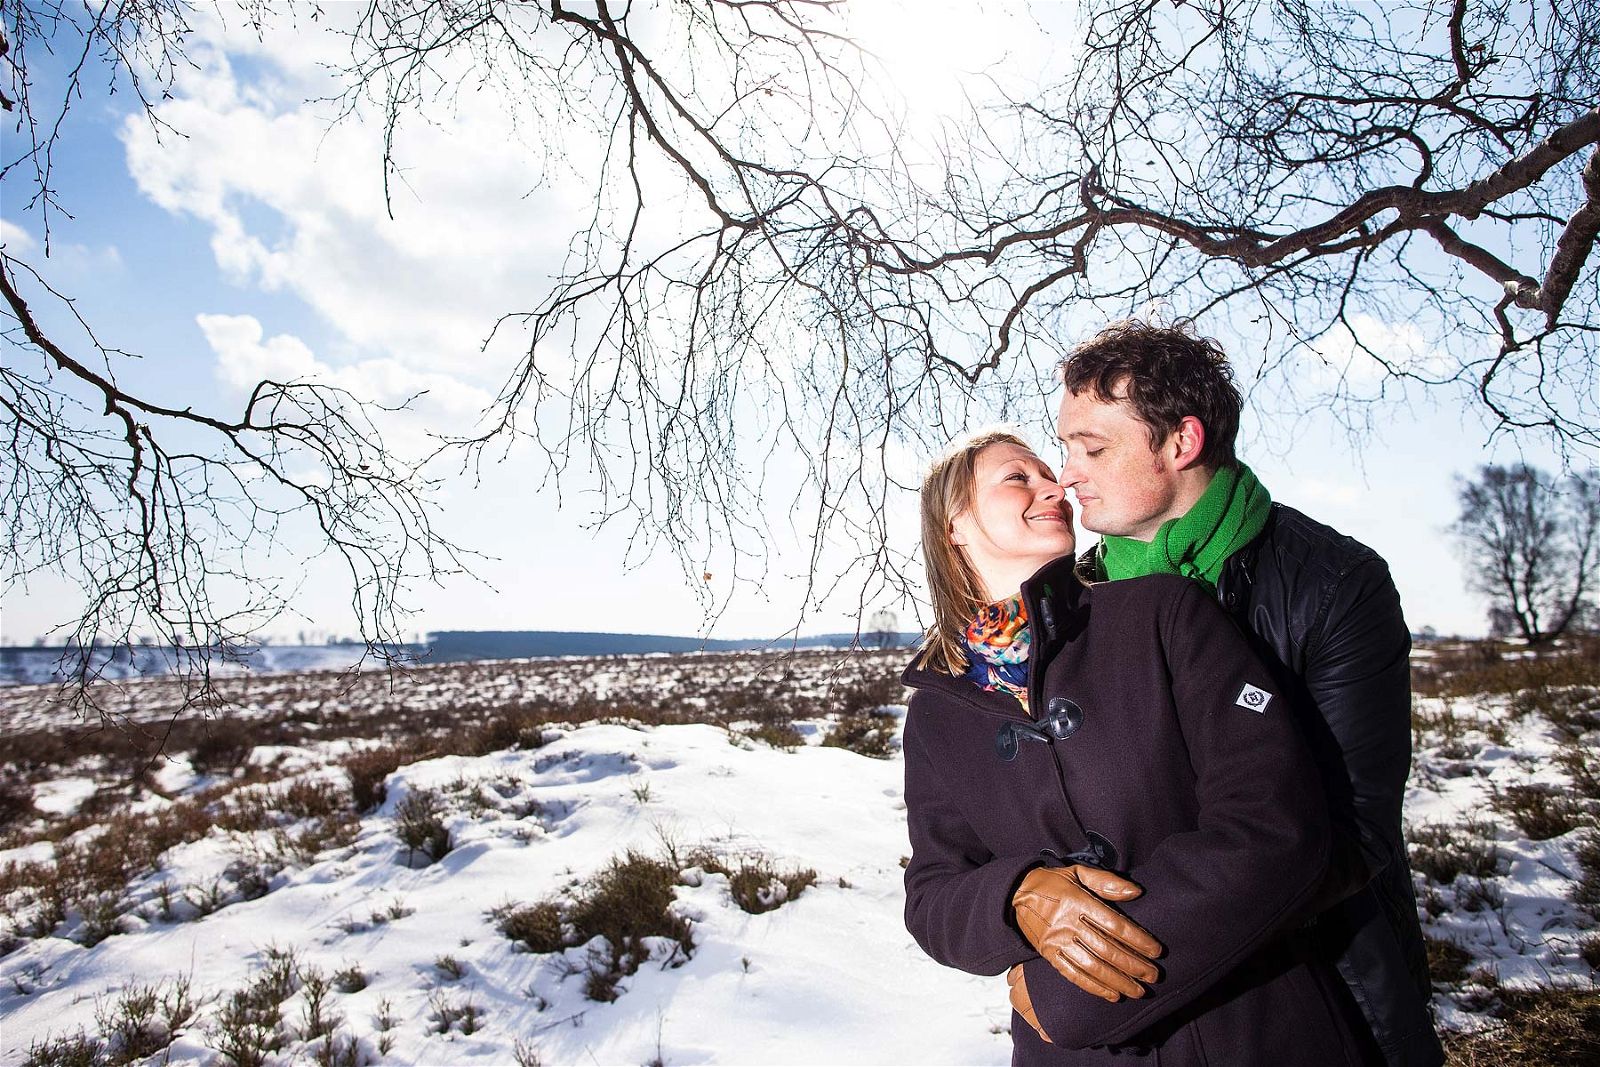 Relaxed engagement shoot on the snowy Cannock Chase in Staffordshire by Stafford Reportage Wedding Photographer Stuart James